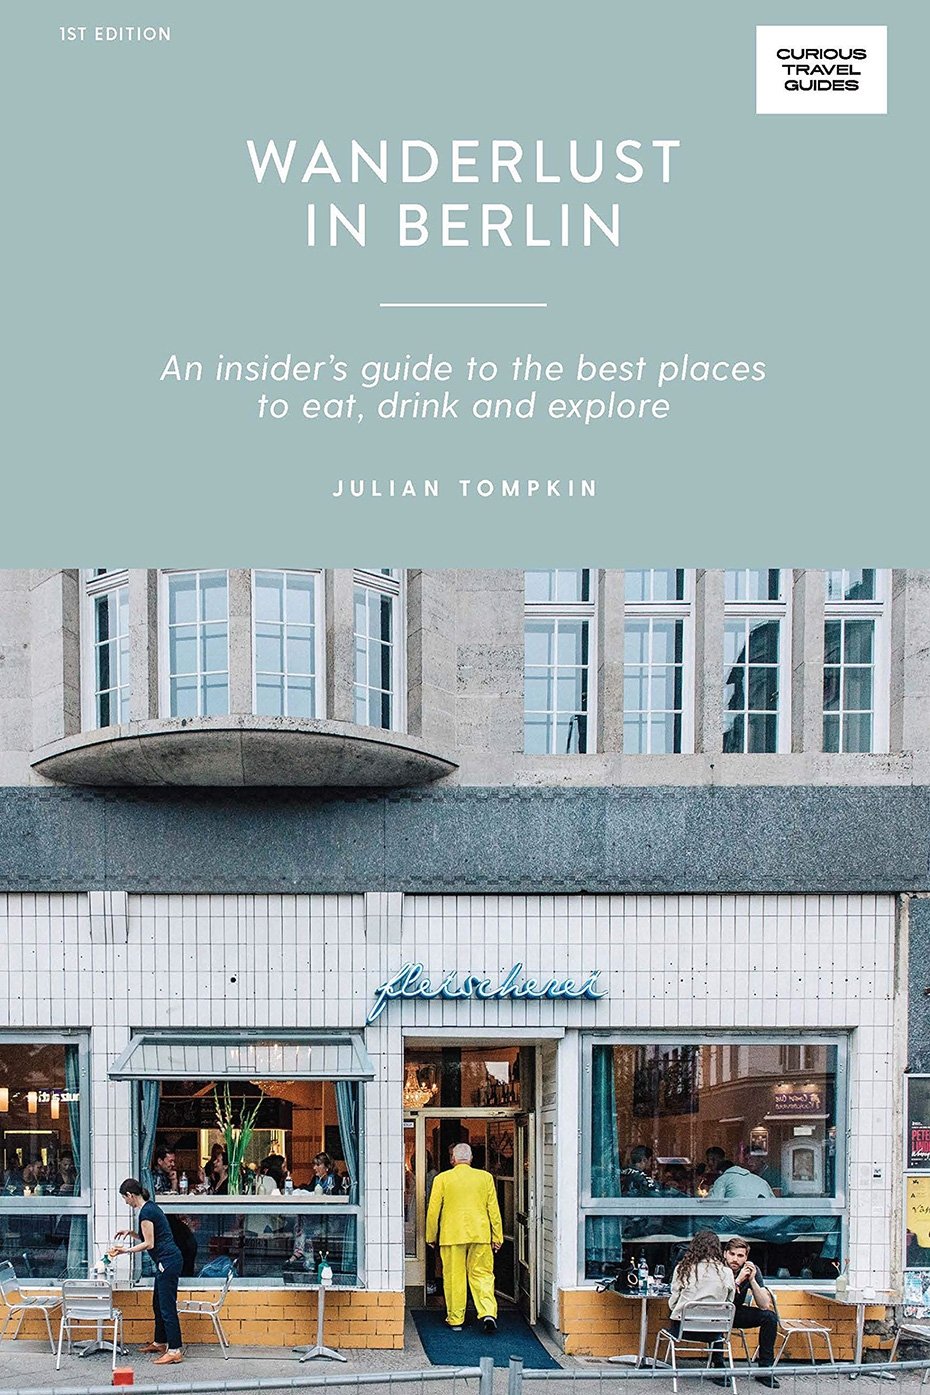 Bookspeed Wanderlust in Berlin by Curious Travel Guides